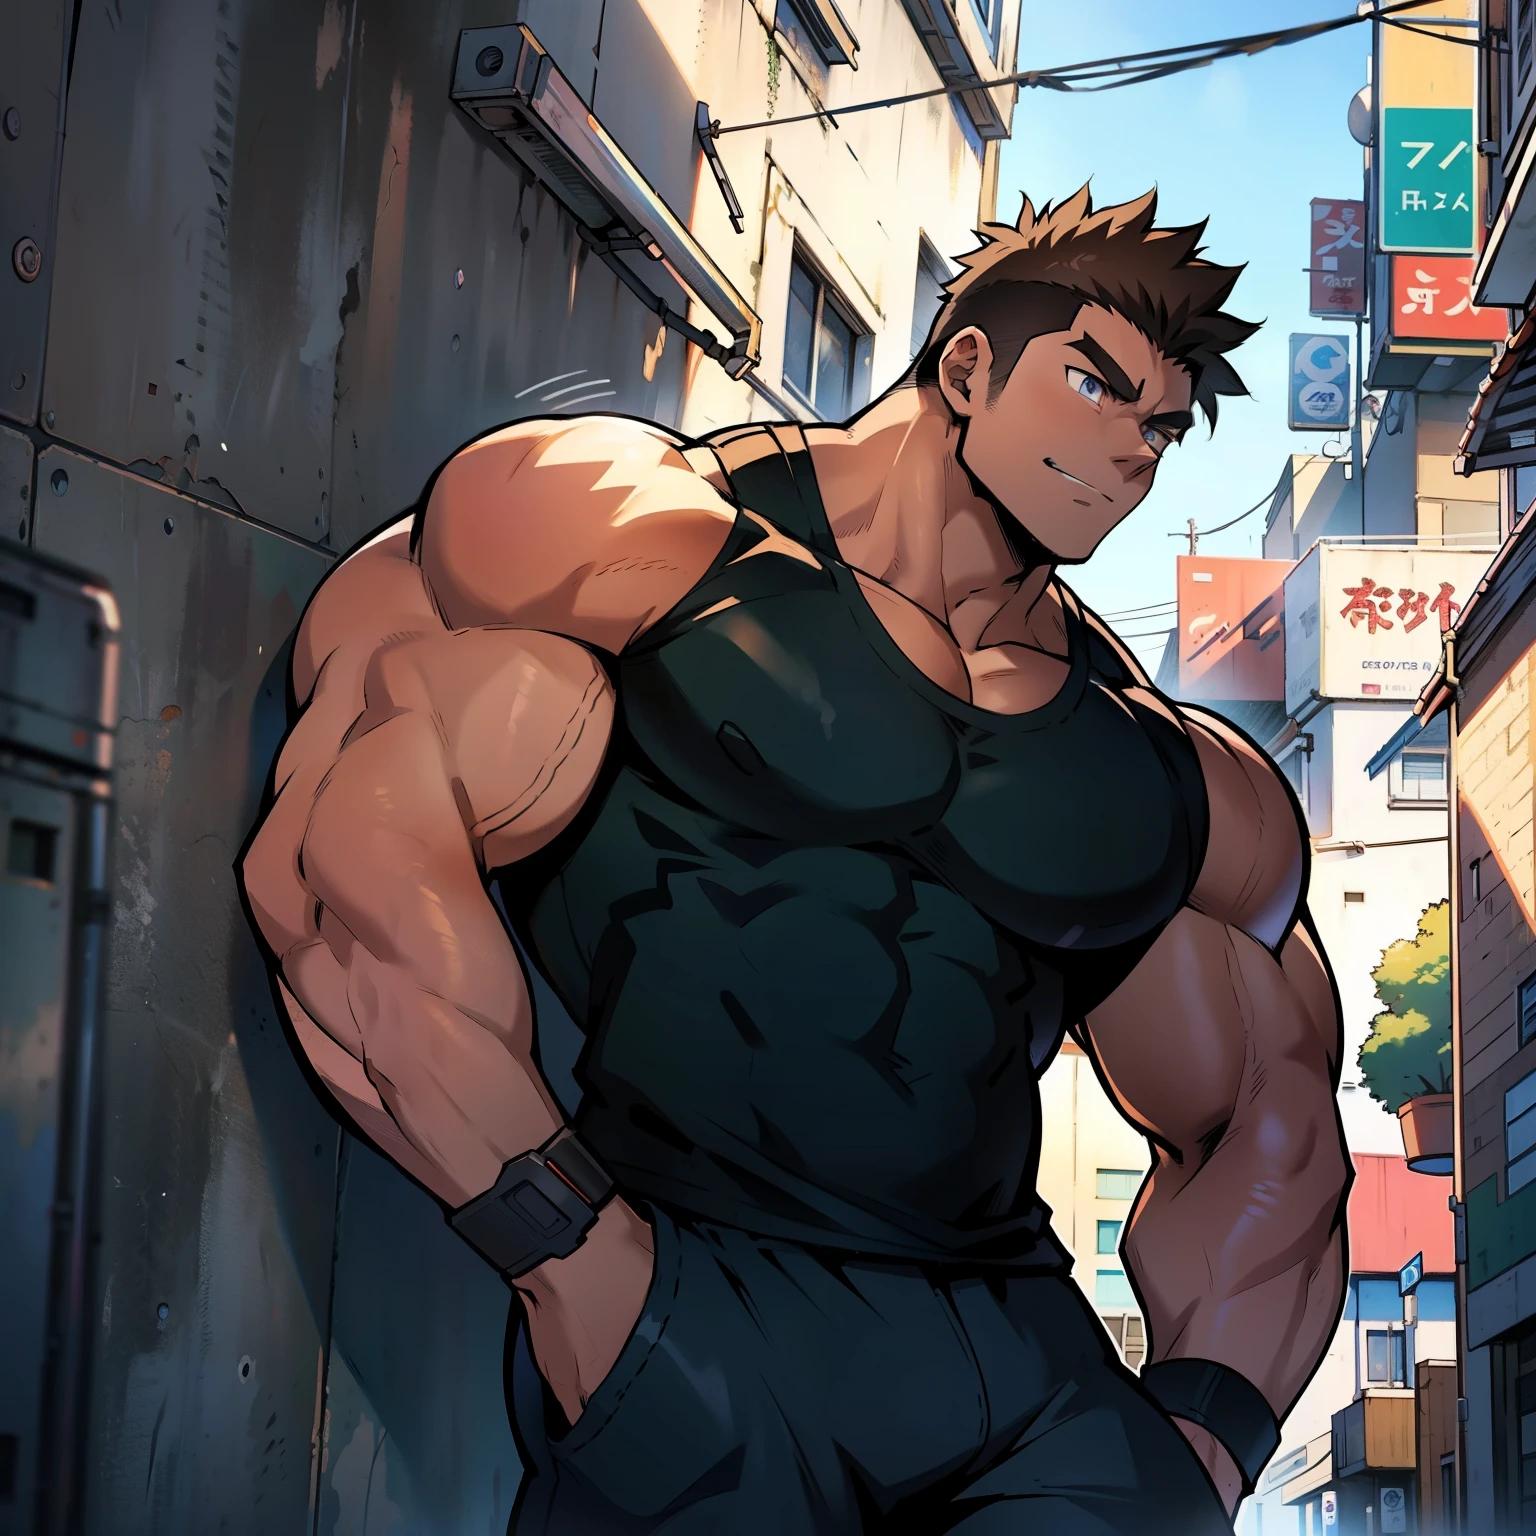 ((Anime style art)), Extremely muscular masculine character, bodybuilder body, wearing a sleeveless V-neck shirt, hands raised at neck level, The character is leaning against a wall. Pockets, Futuristic cityscape, Busy route, Buildings, person
AS & Vehicles. Main character from the anime, Nice image, Hard drive, 4k, Main character leaning against a wall with his hands at face level.